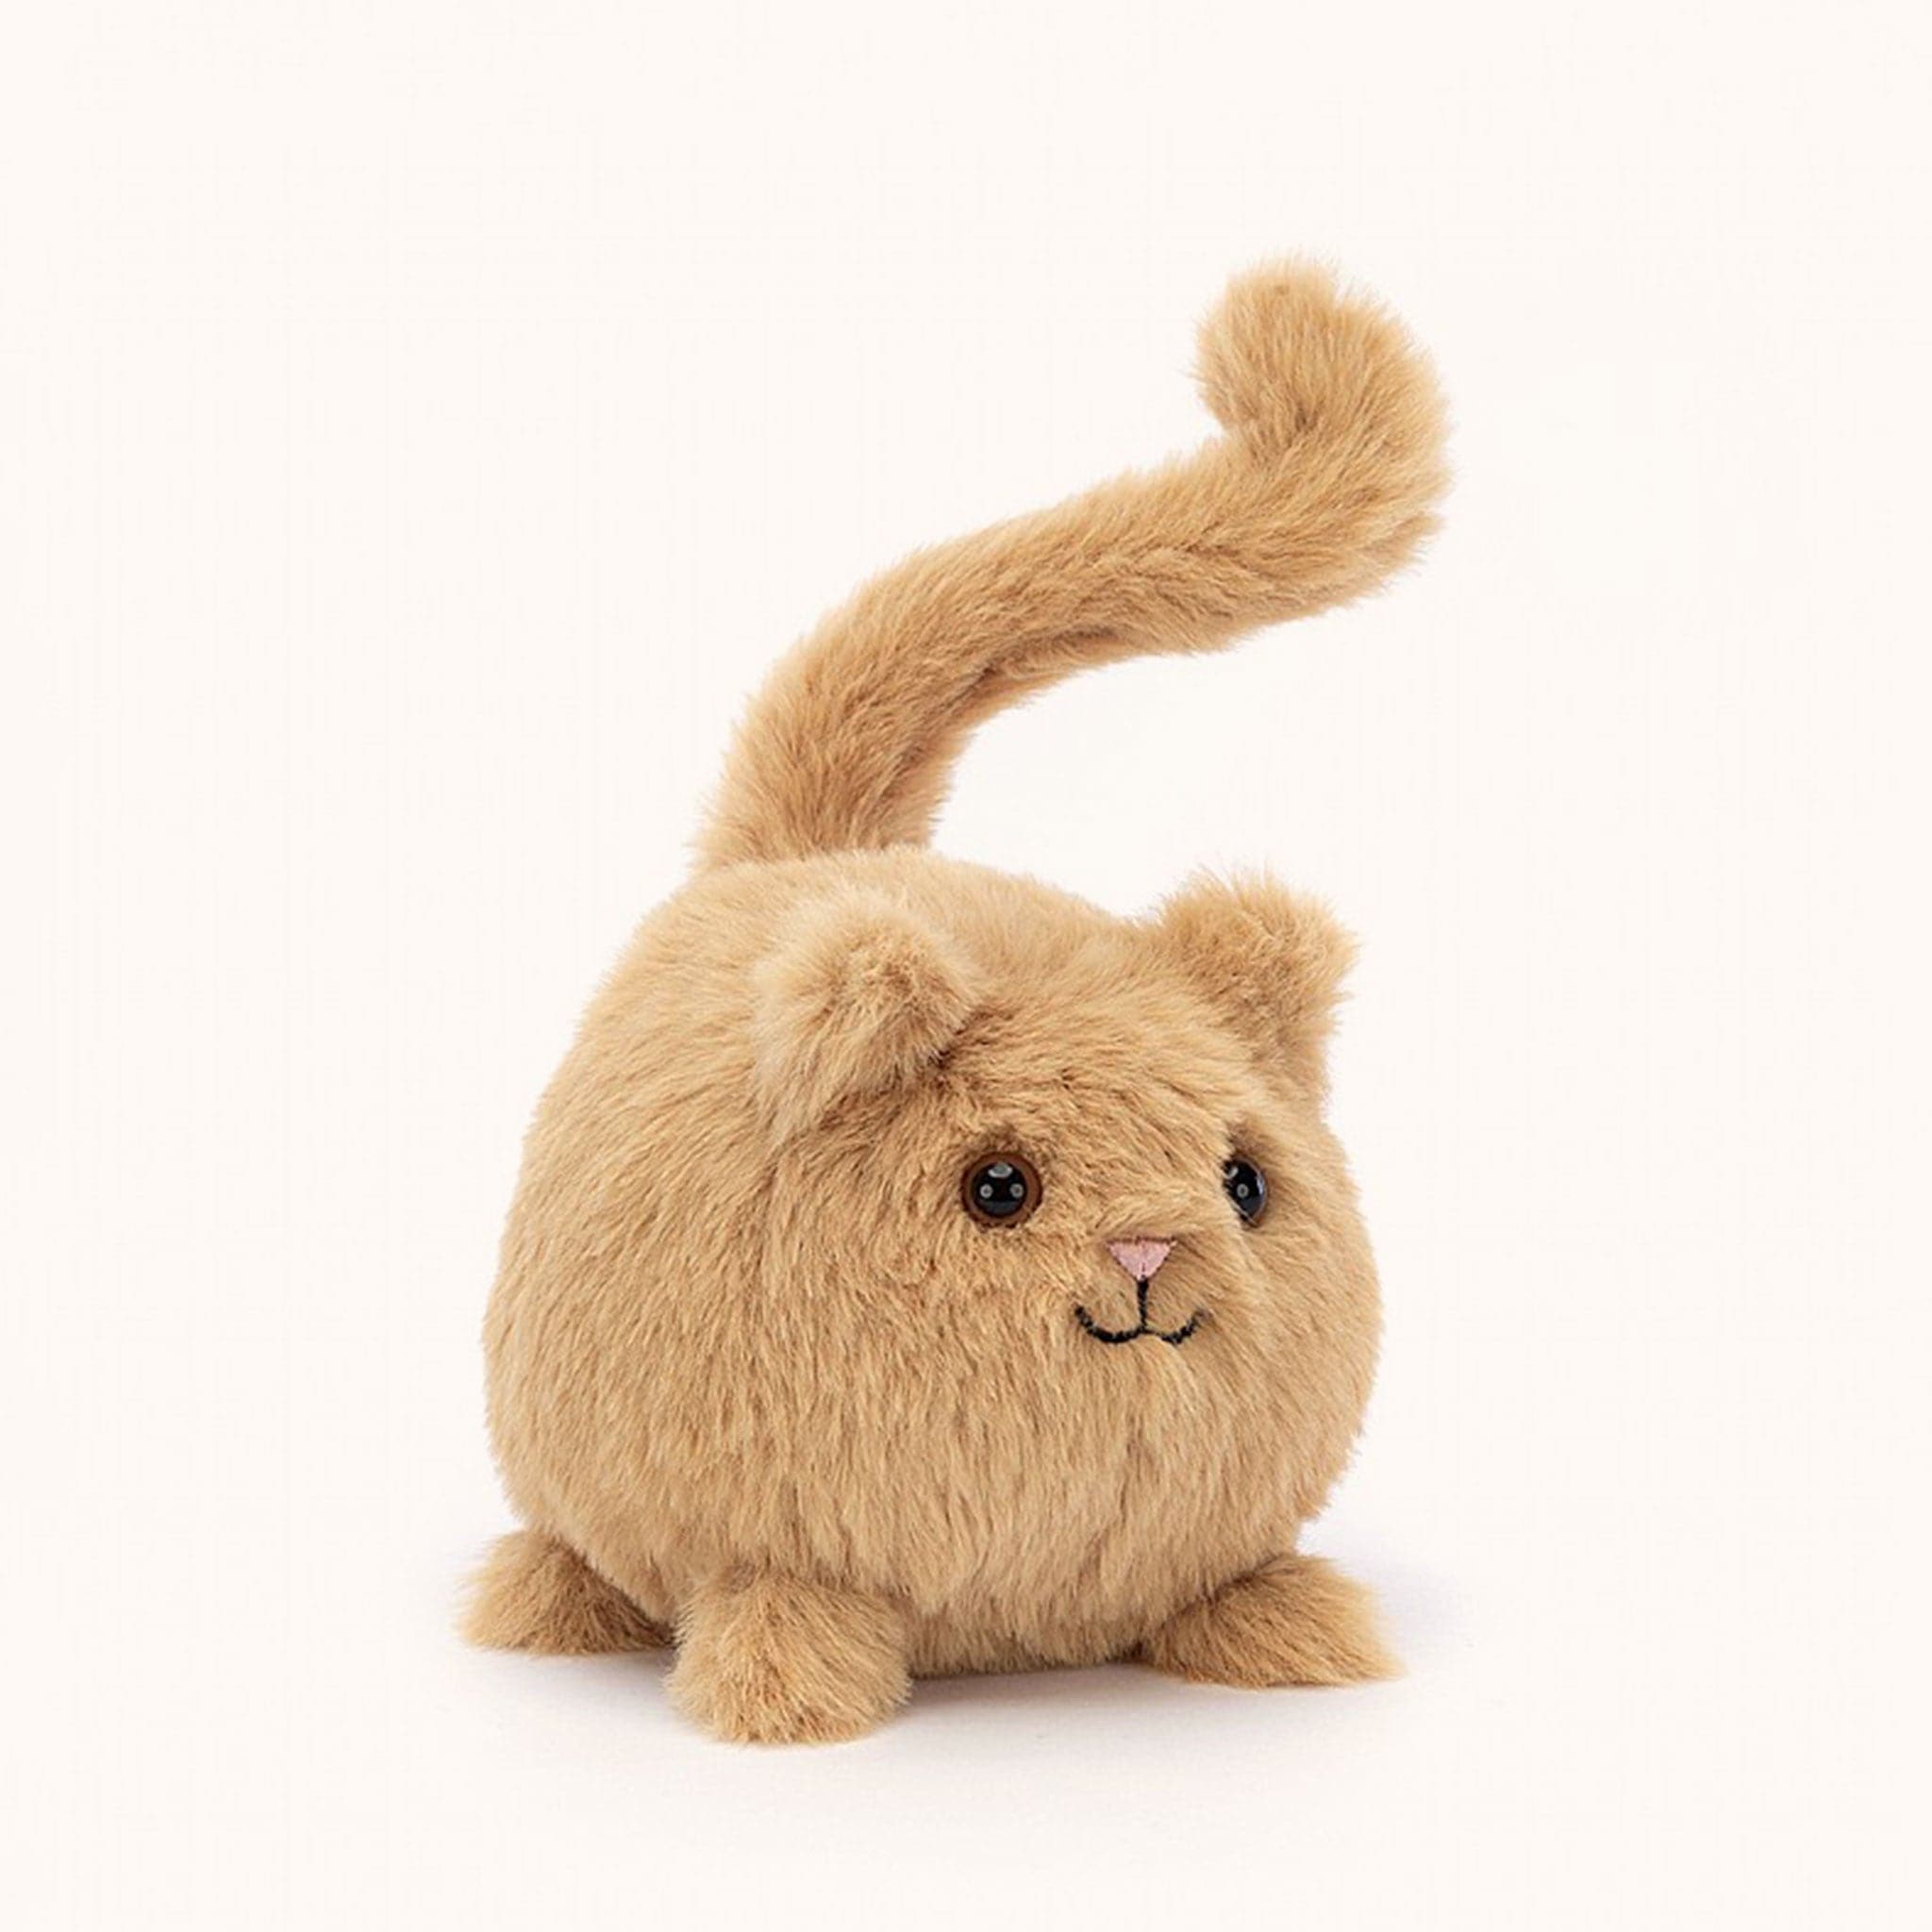 Soft stuffed animal in the shape of a round caramel colored cat with a question mark shaped tail.